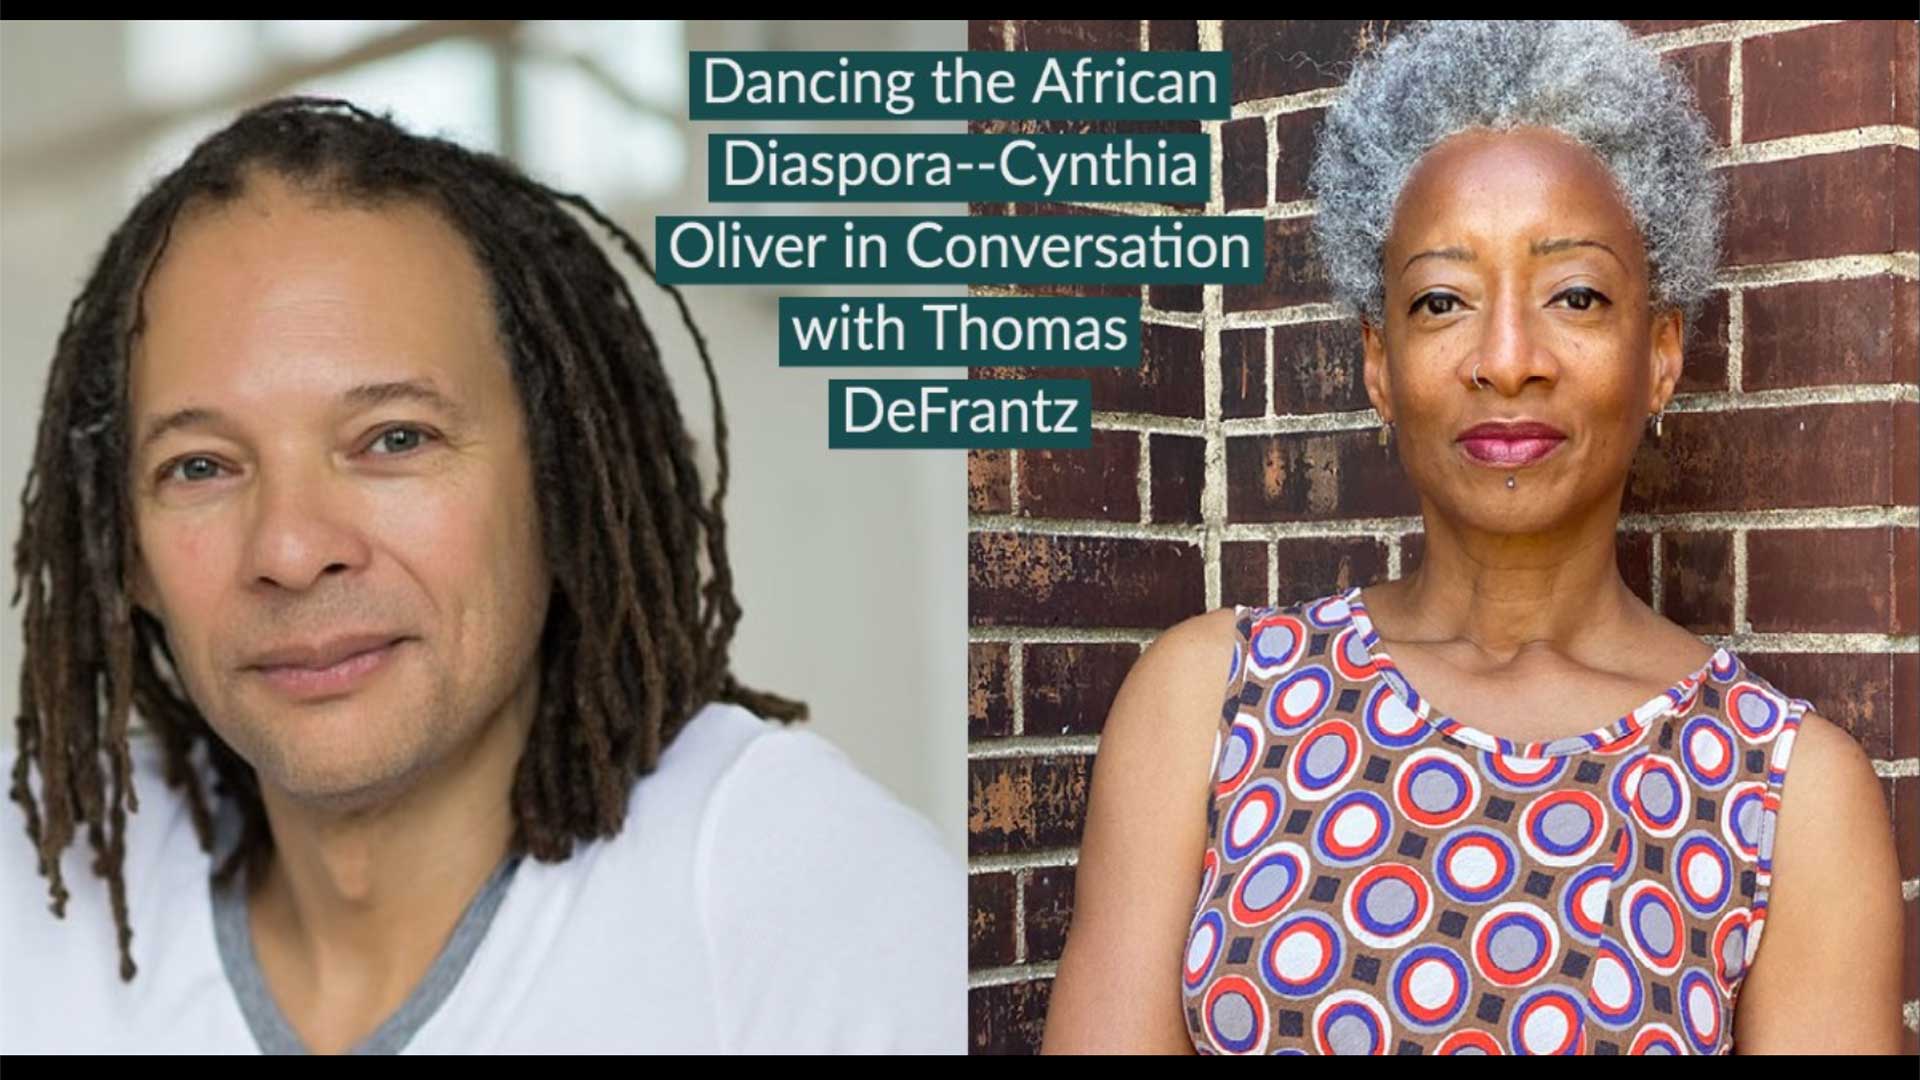 image of Thomas DeFrantz next to an image of Cynthia Oliver with text that says Dancing the African Diaspora Cynthia Oliver with Thomas DeFrantz